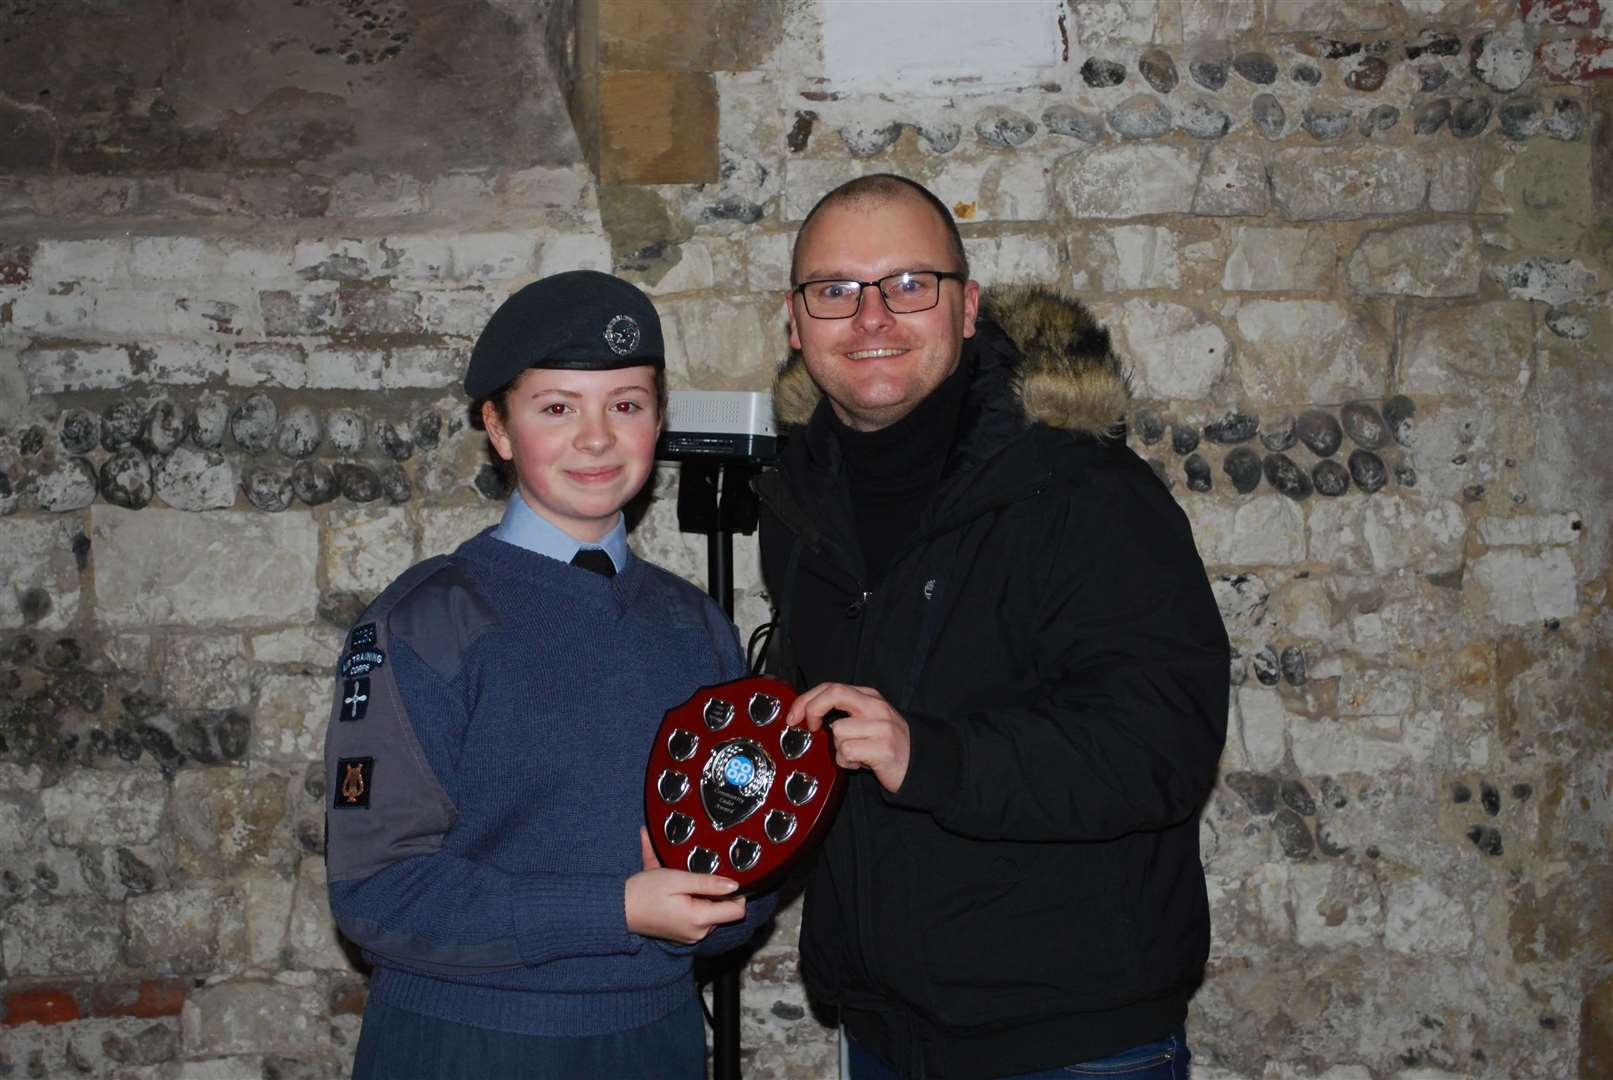 A new award for community cadet was presented by Mill Hill Co-op store manager Andy Street to Amy Berridge for her dedicated involvement in community events